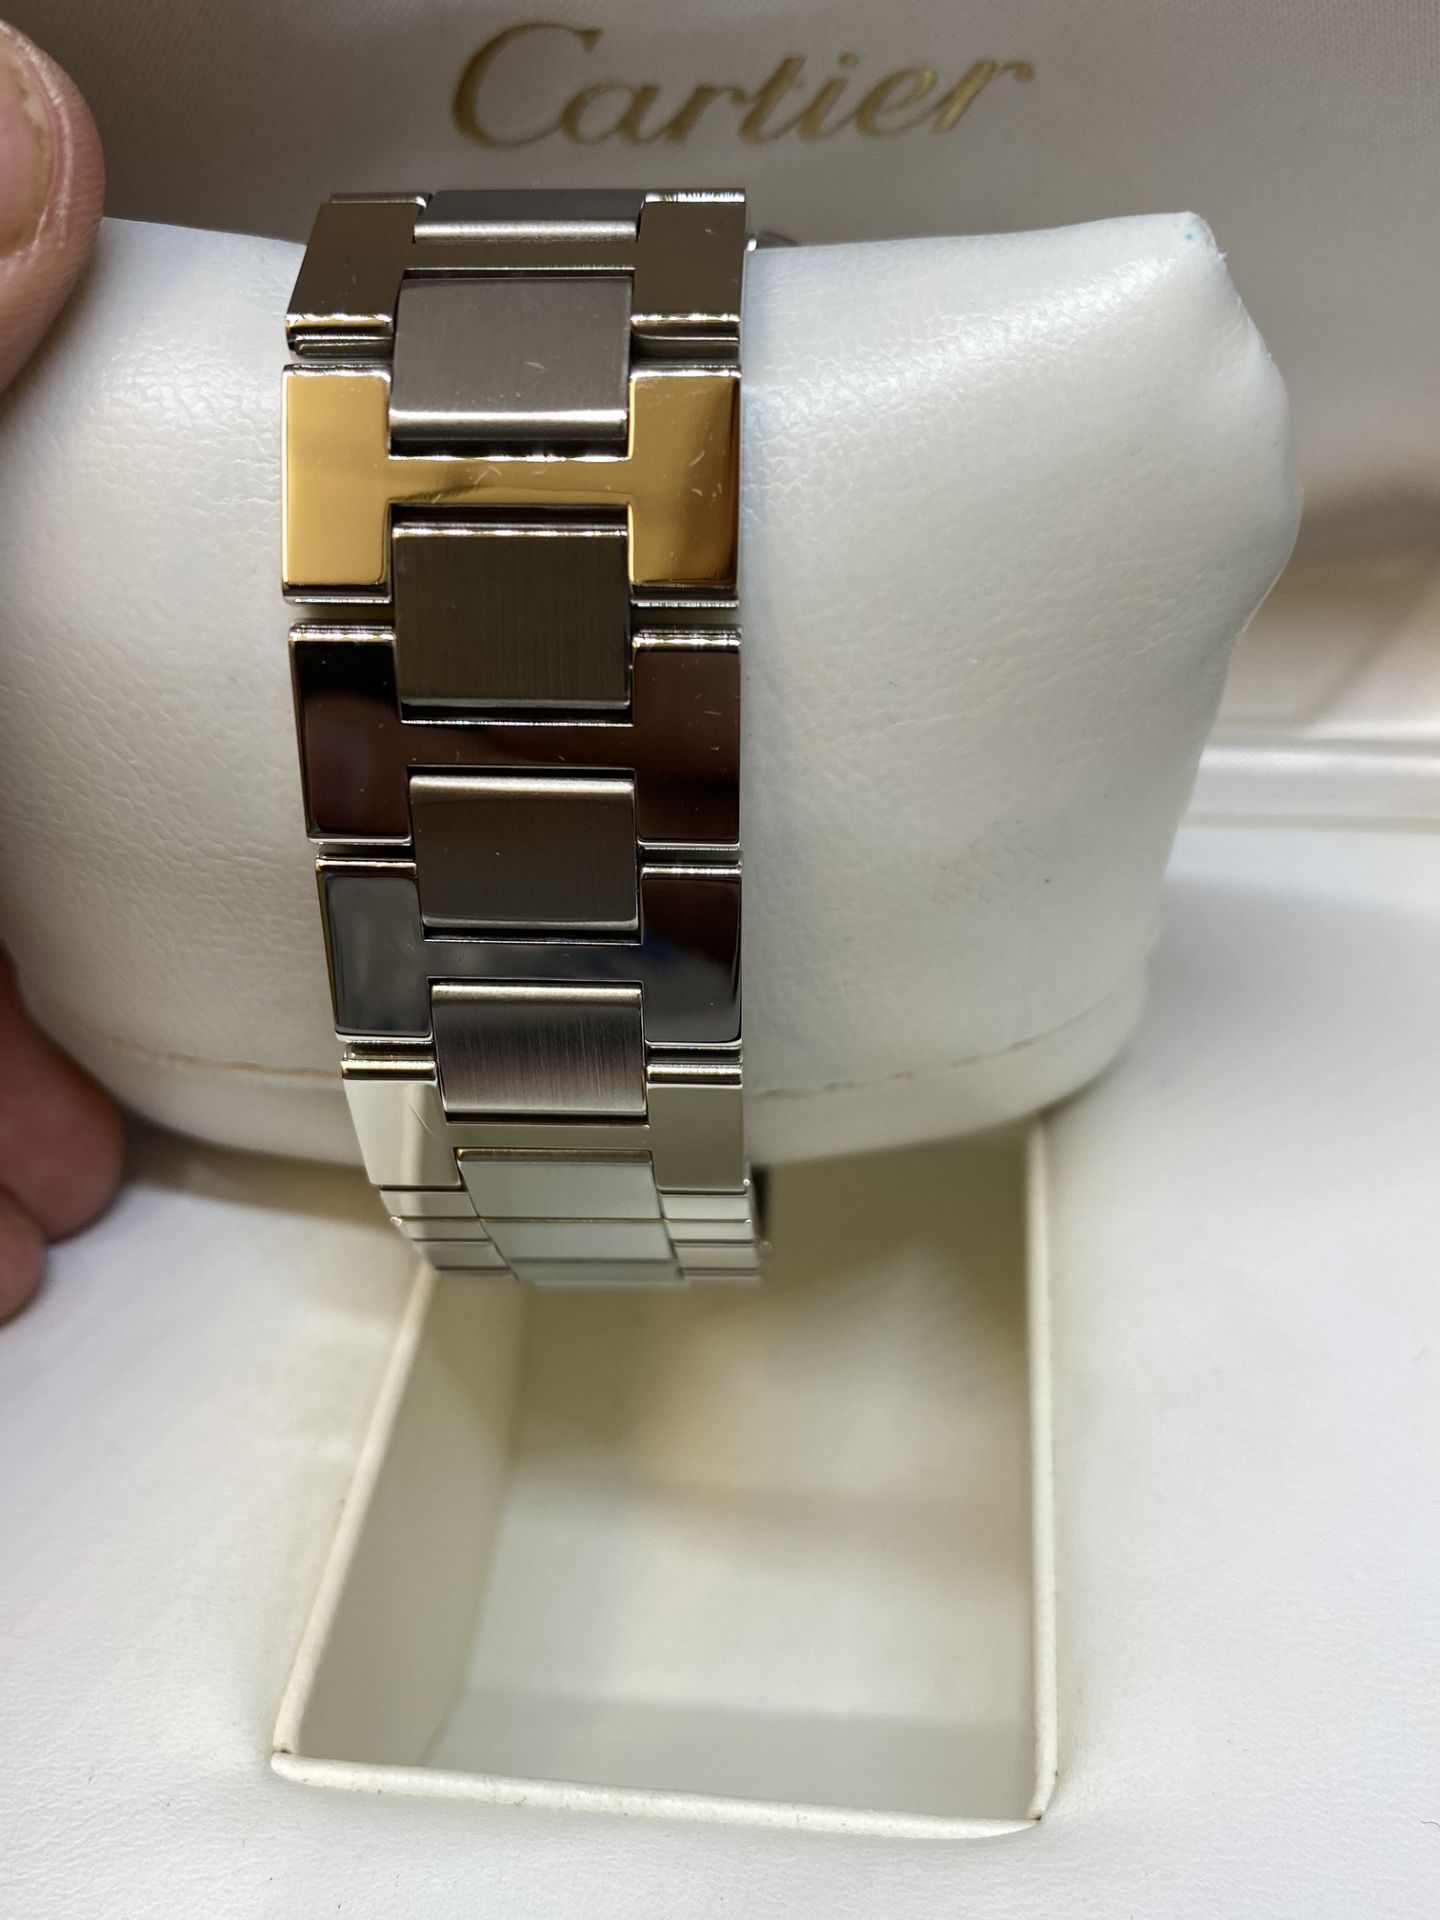 EXTRA LARGE CARTIER STAINLESS STEEL AUTOMATIC WATCH WITH BOX - Image 7 of 9